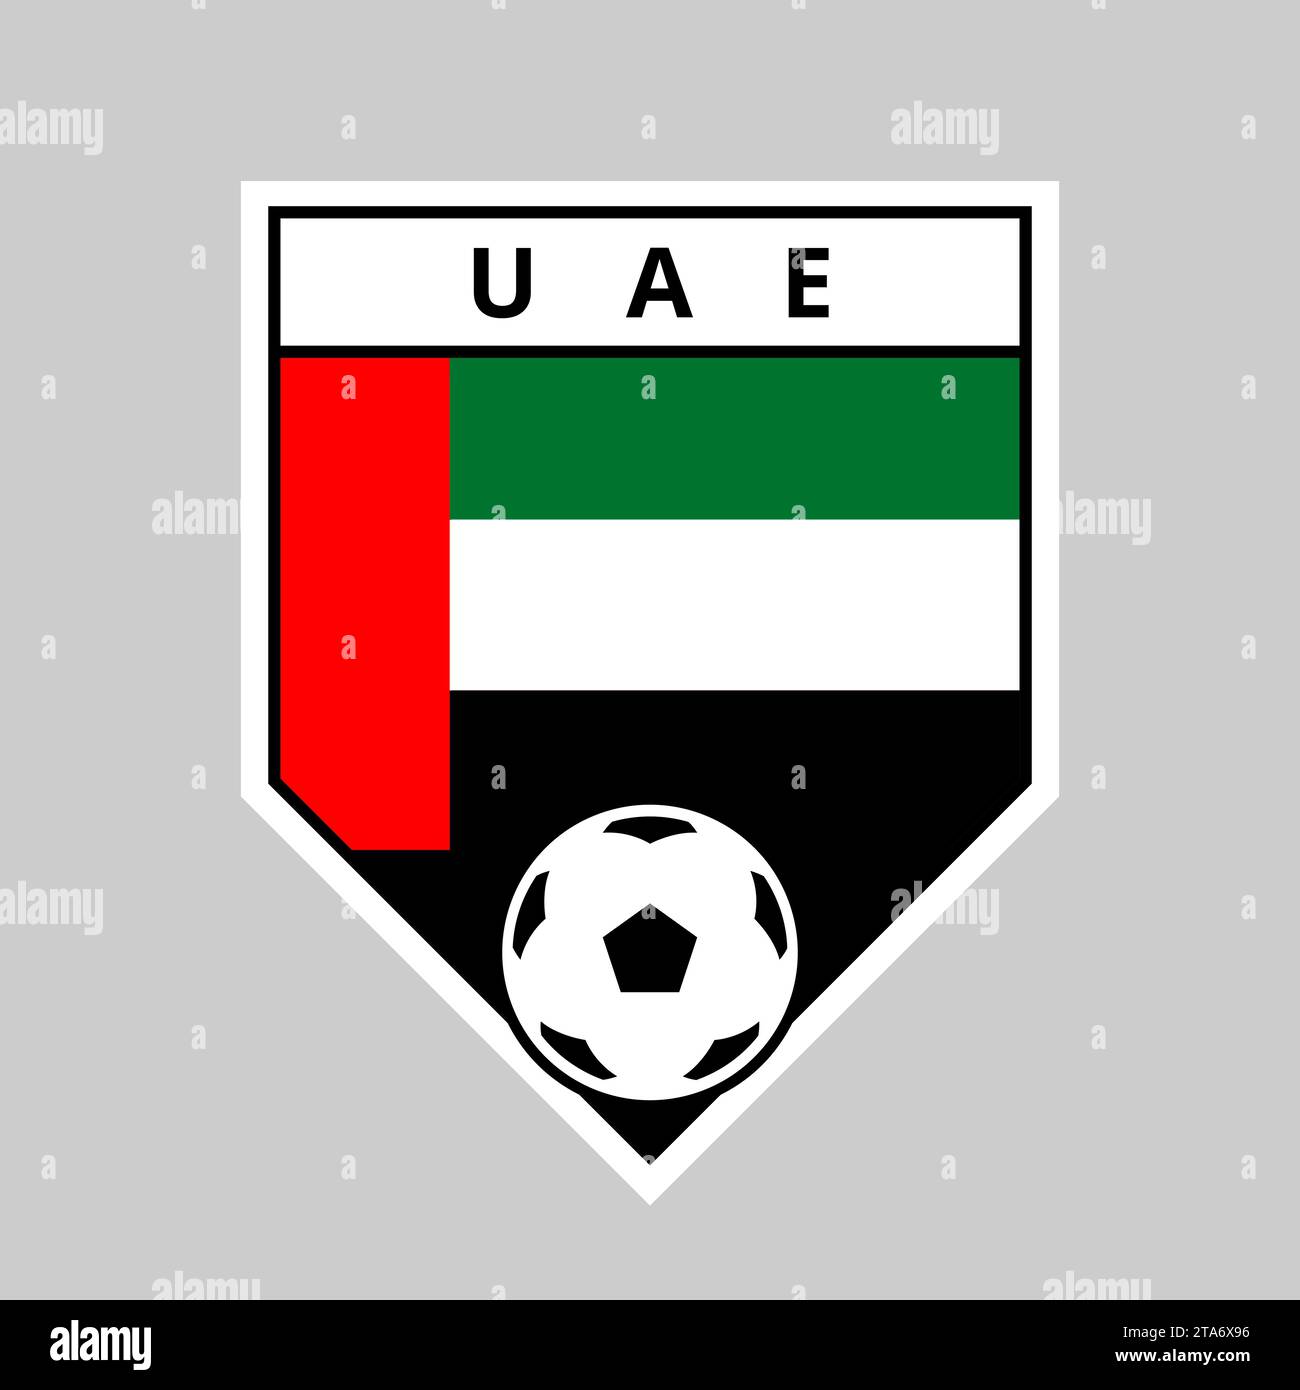 Illustration of Angled Shield Team Badge of United Arab Emirates for Football Tournament Stock Vector